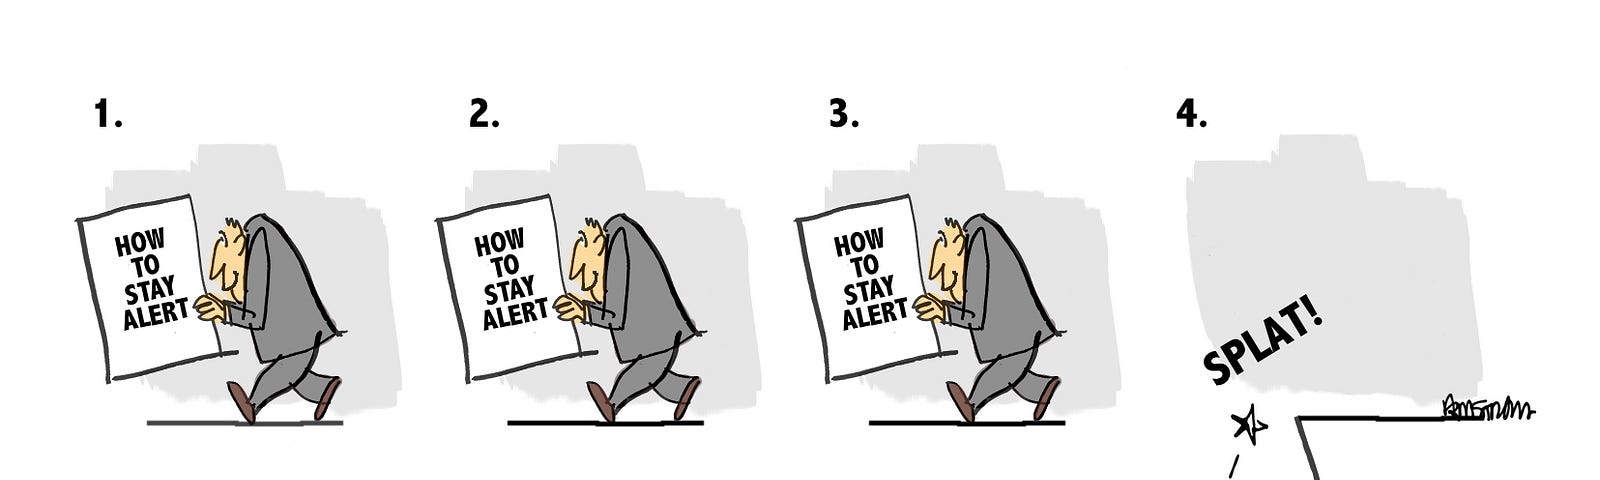 Four panel cartoon. In the first three panels, a goofy-looking guy is walking along reading a book called “How To Stay Alert.” In the last panel he’s gone, having fallen off a cliff.